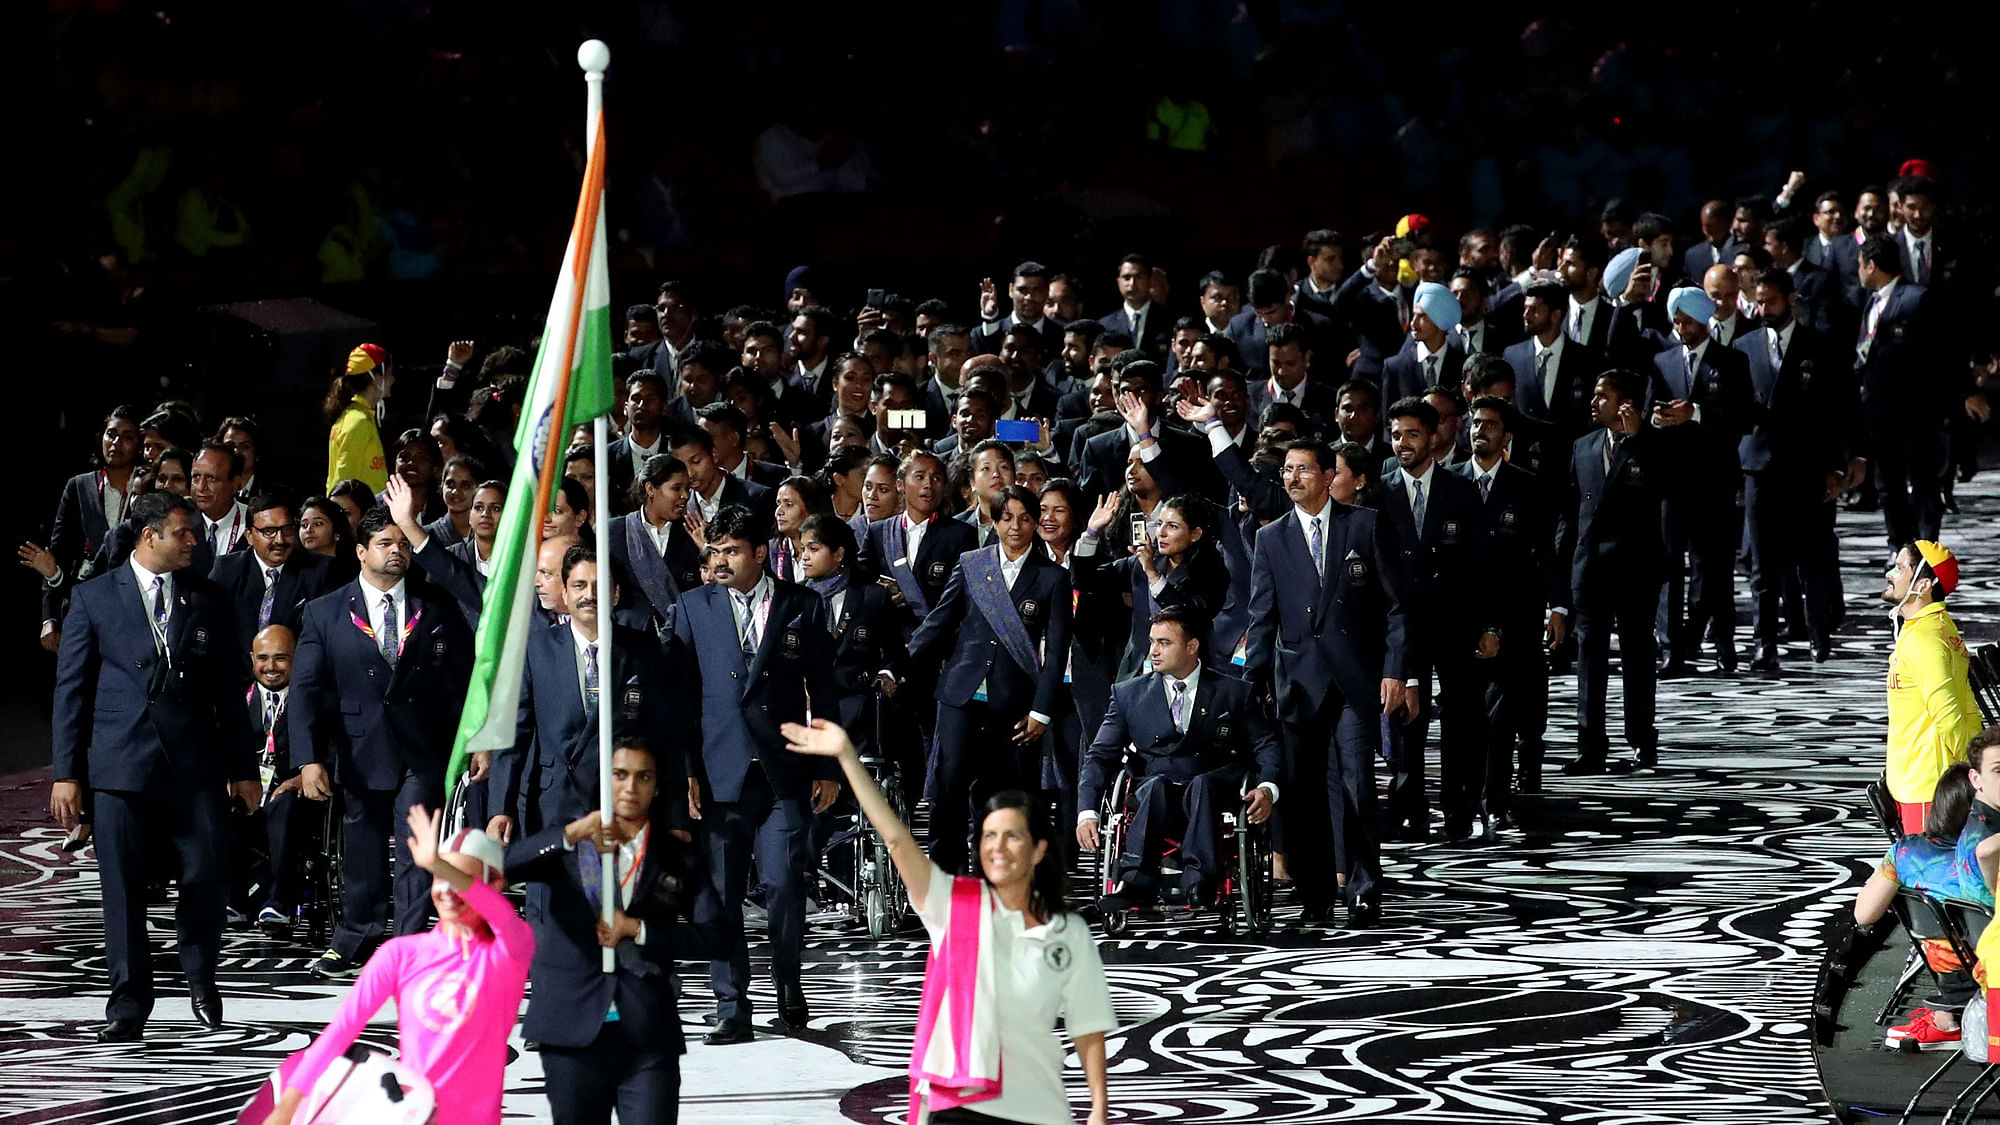 PV Sindhu leads India’s contingent for the CWG opening ceremony.